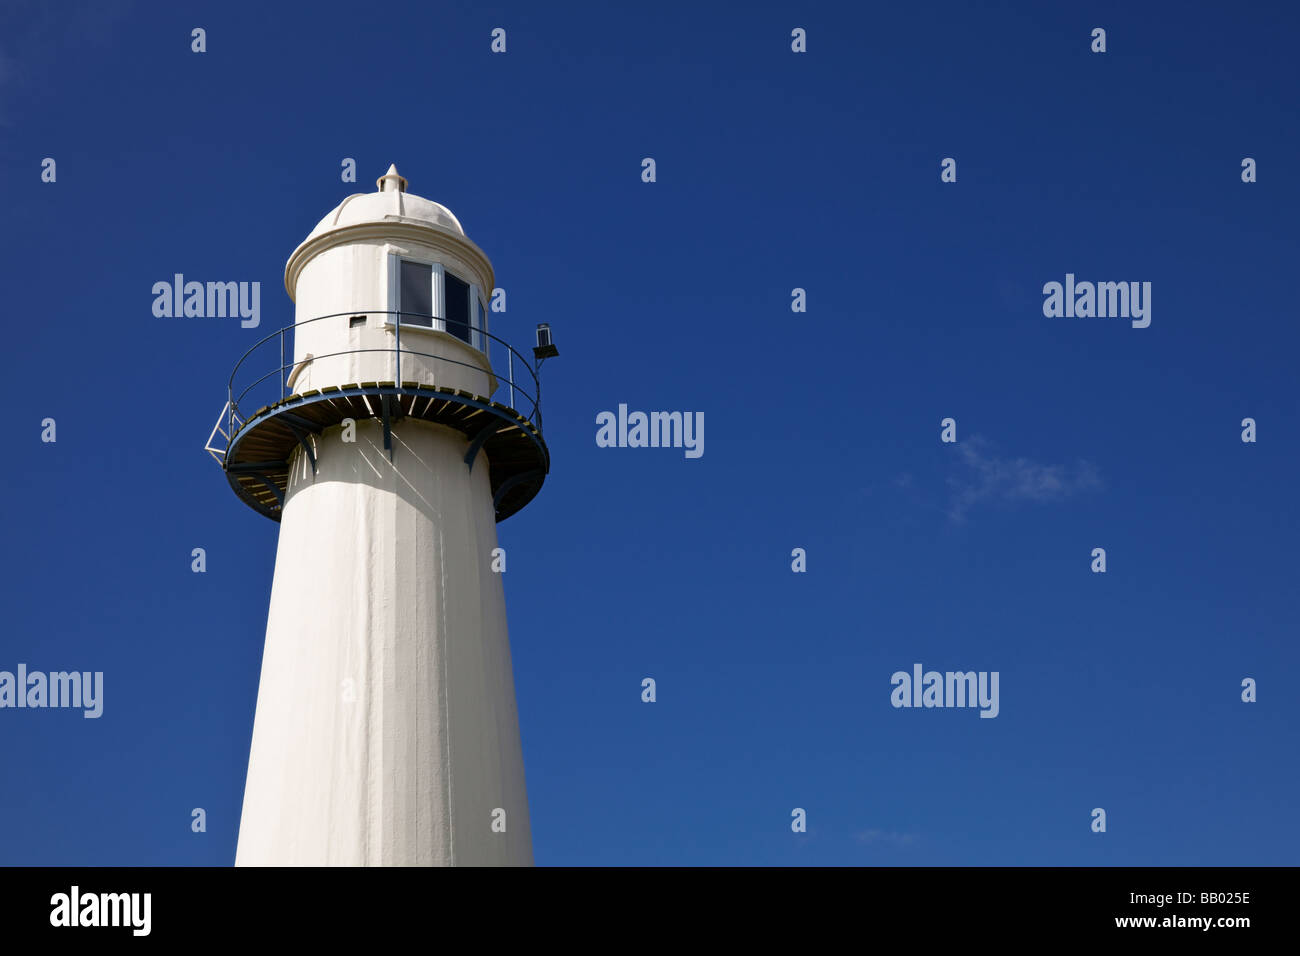 Top section housing the light on a traditional UK Lighthouse against a blue sky - with copy space Stock Photo